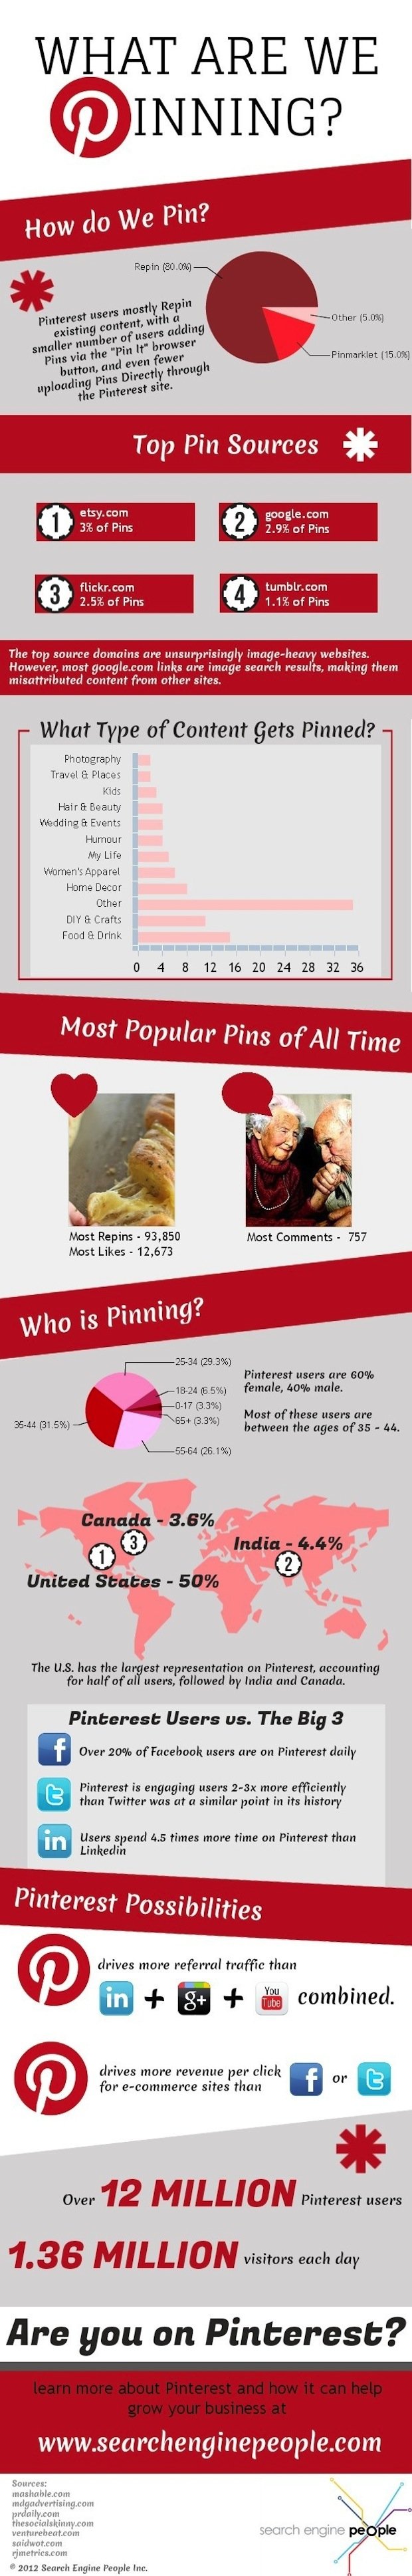 What Are You Pinning on Pinterest? [Infographic]